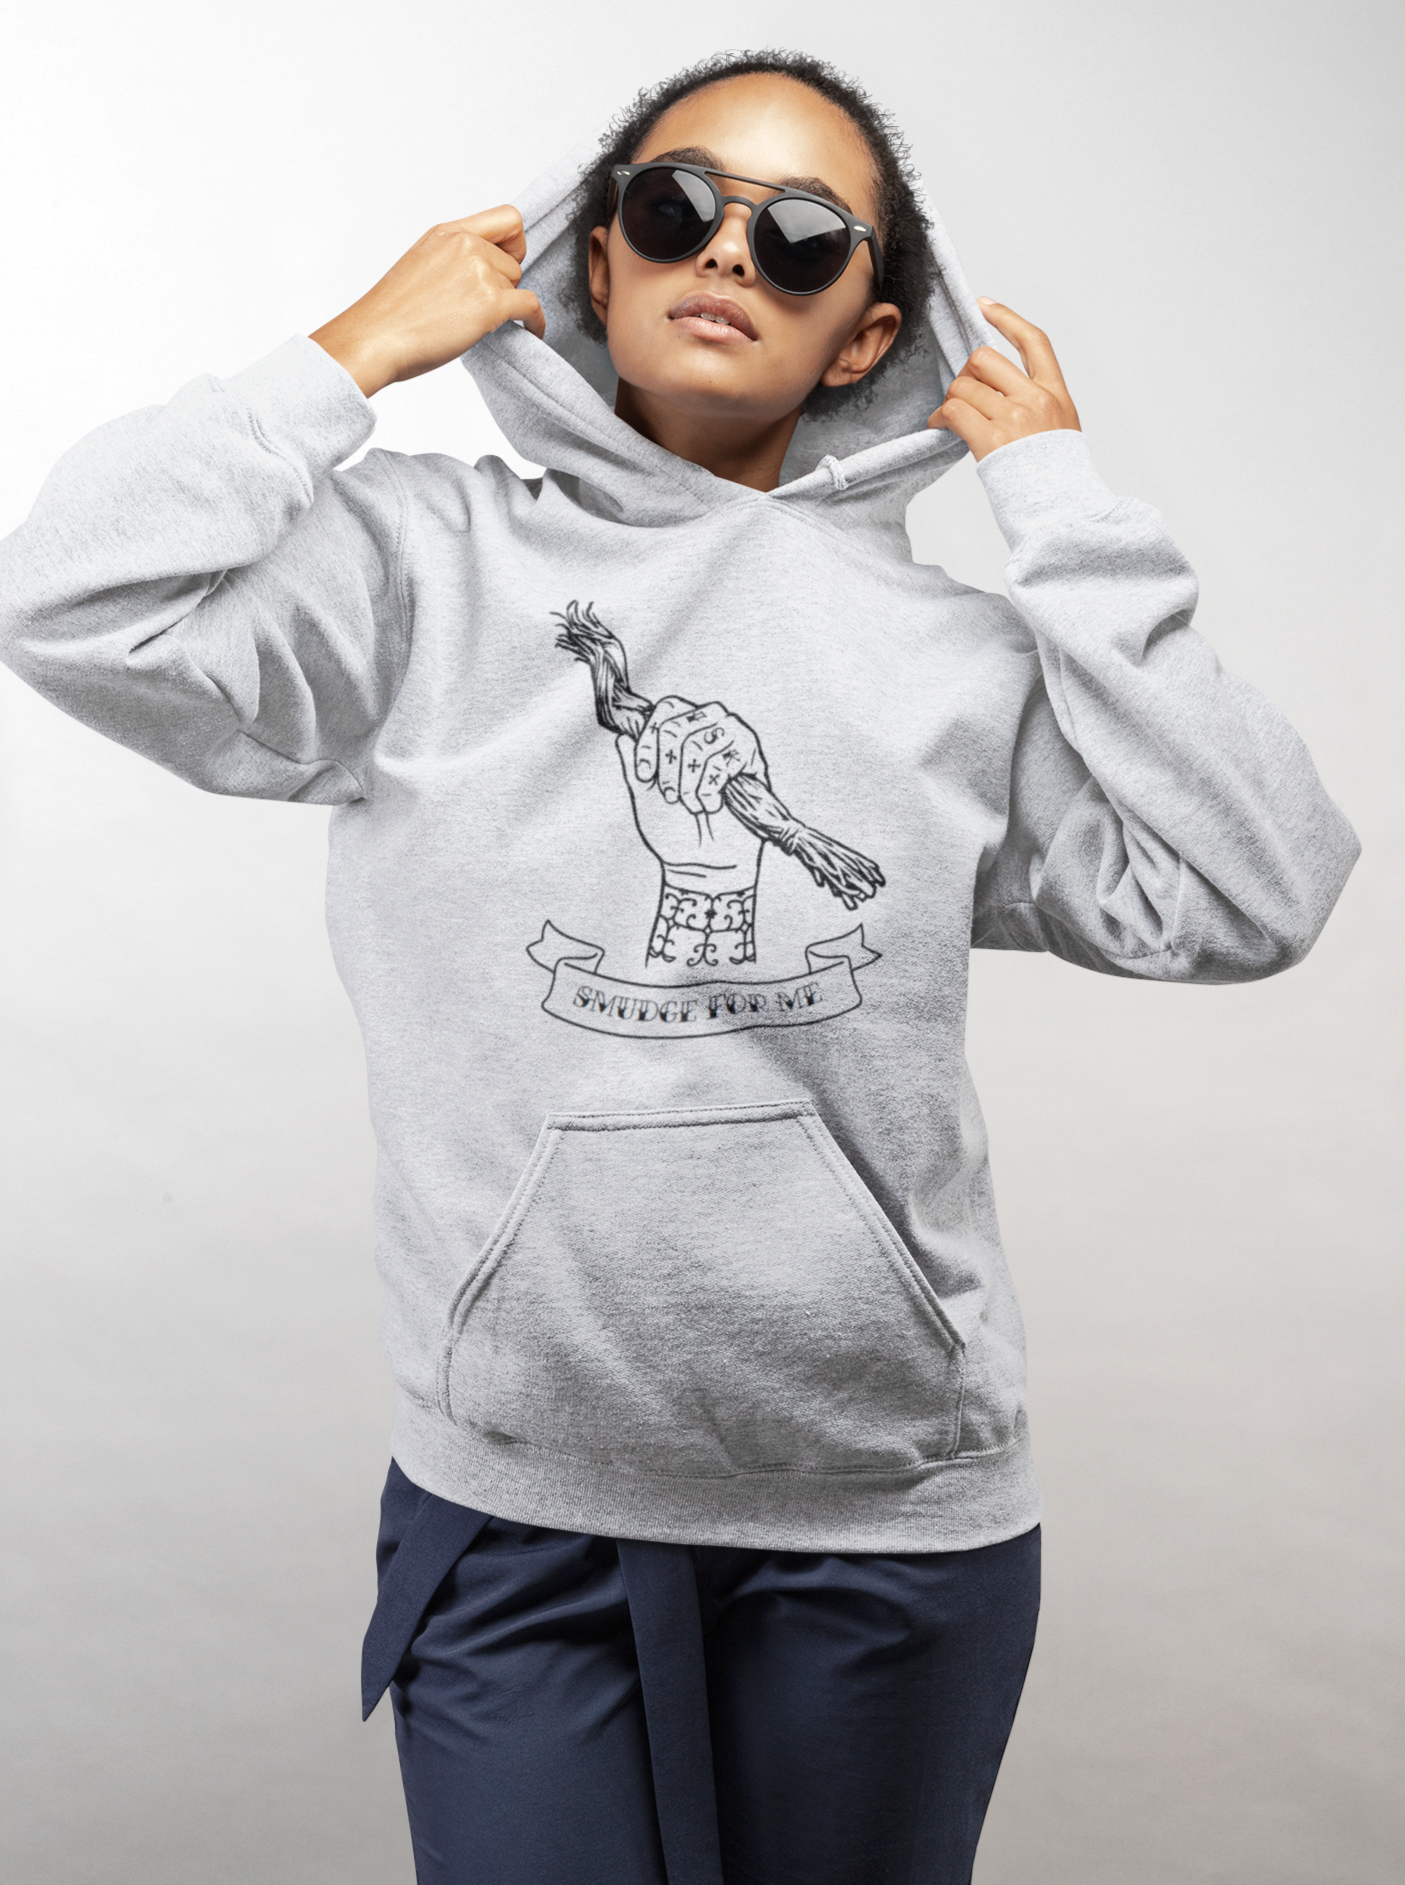 Smudge for Me Male Hoodie - Black Ink on Heather Grey